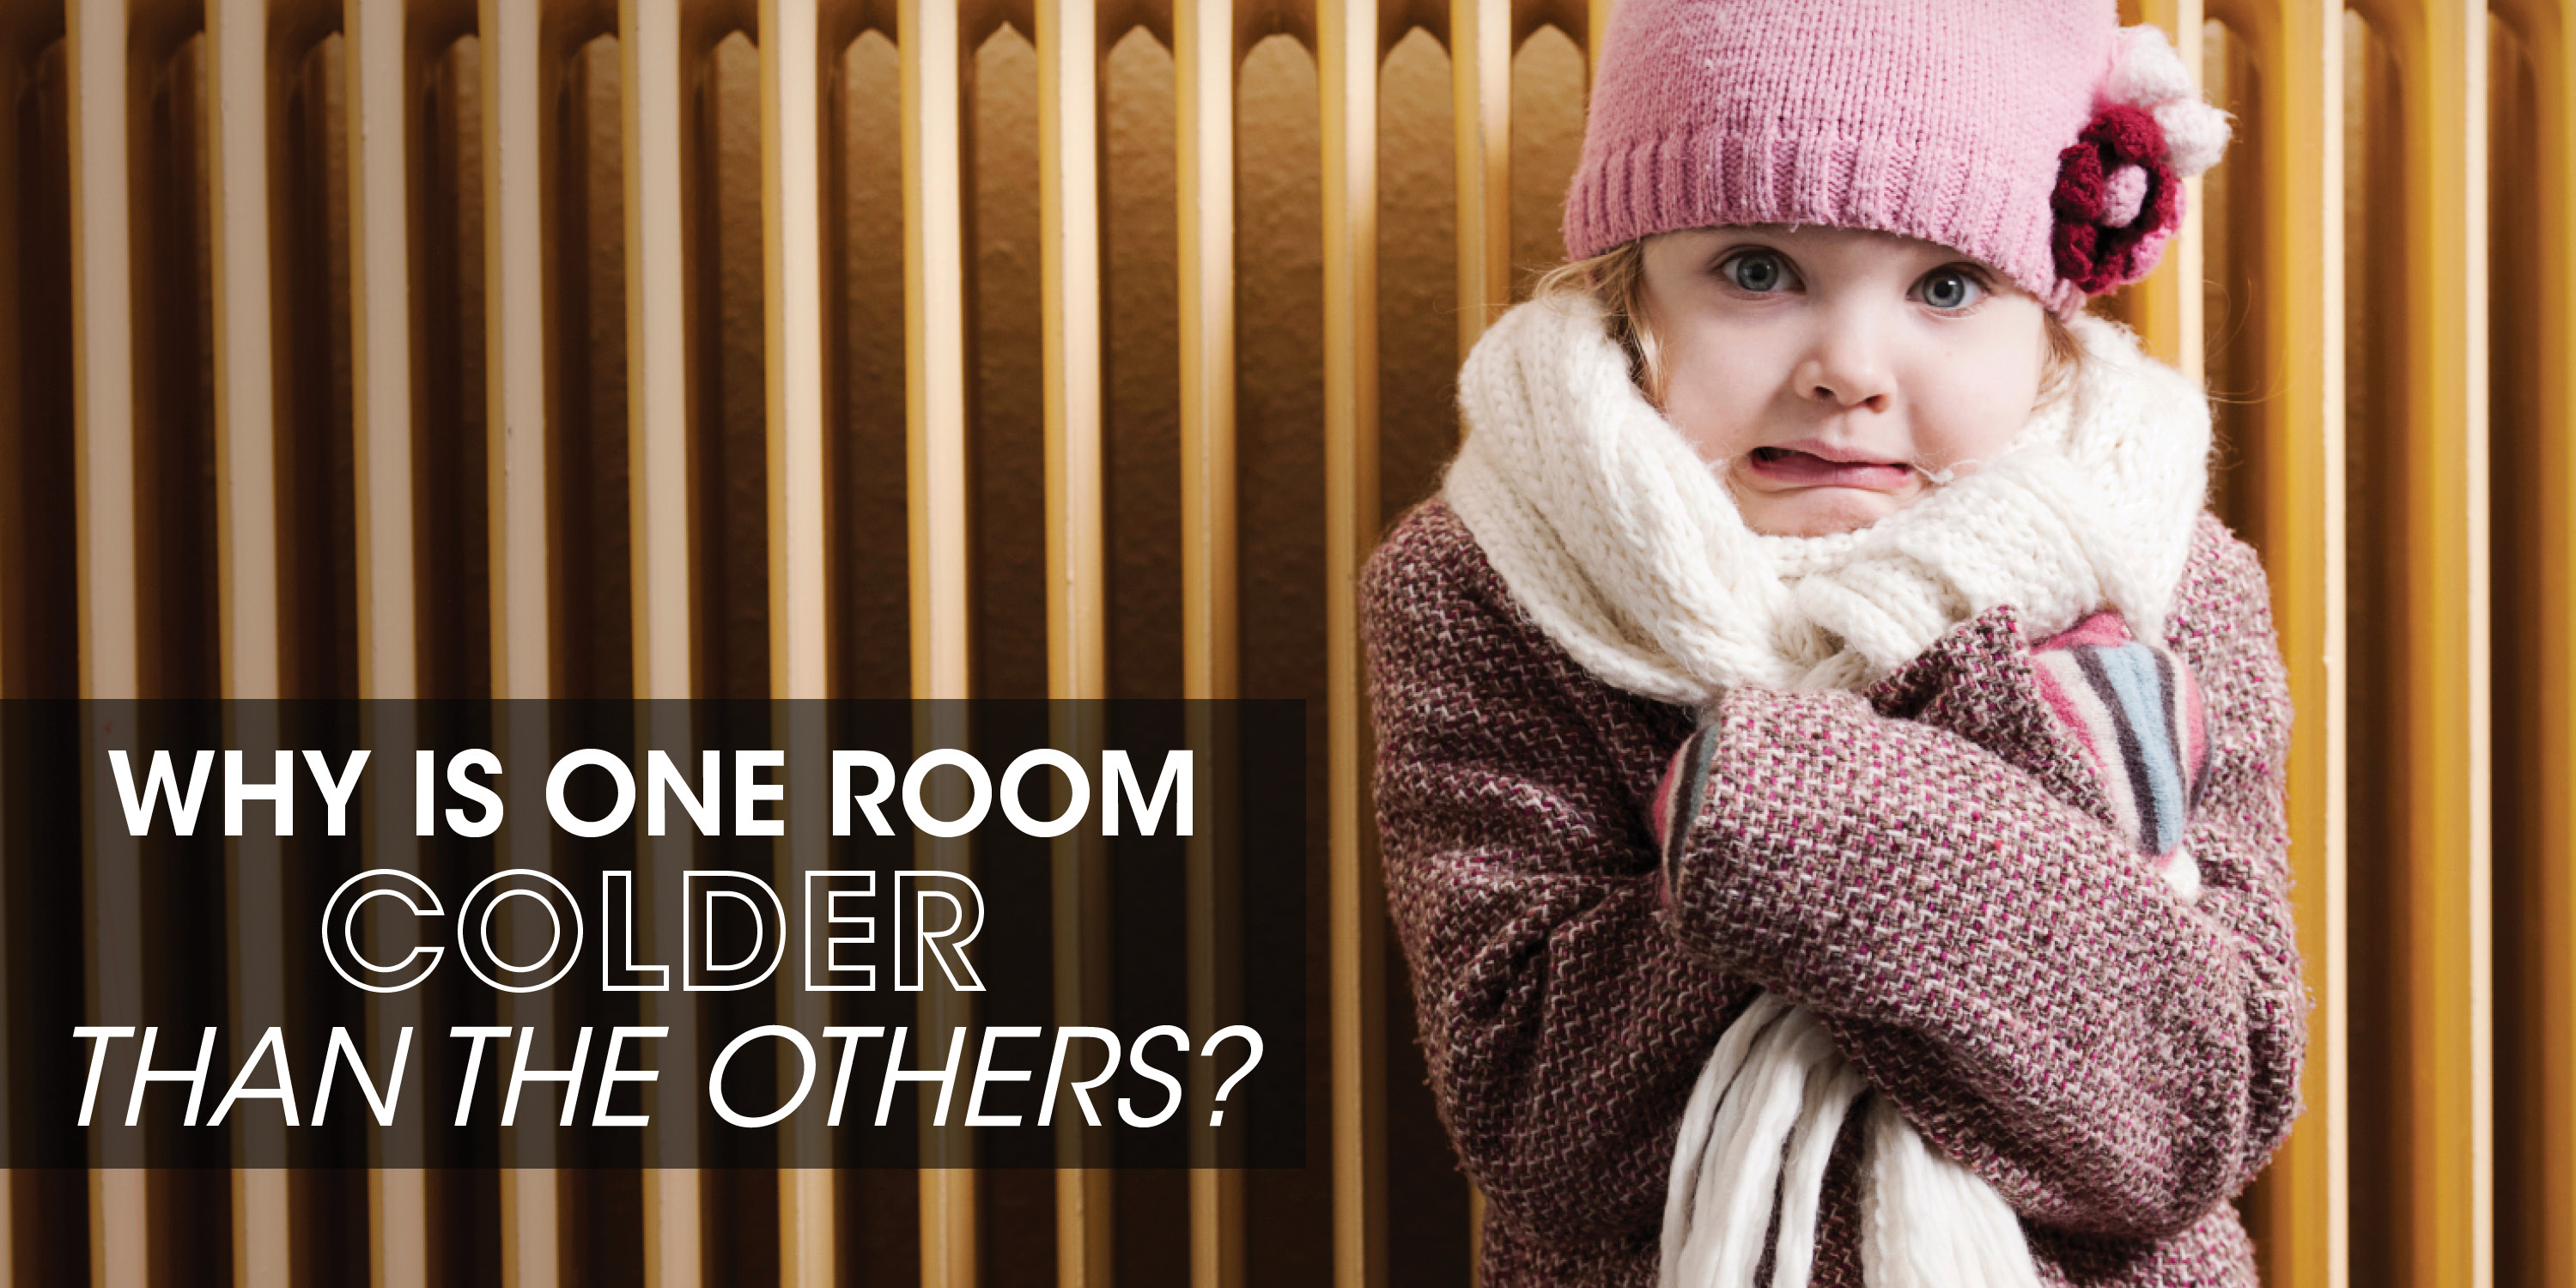 Child shivering with text: "Why is one room colder than others?"